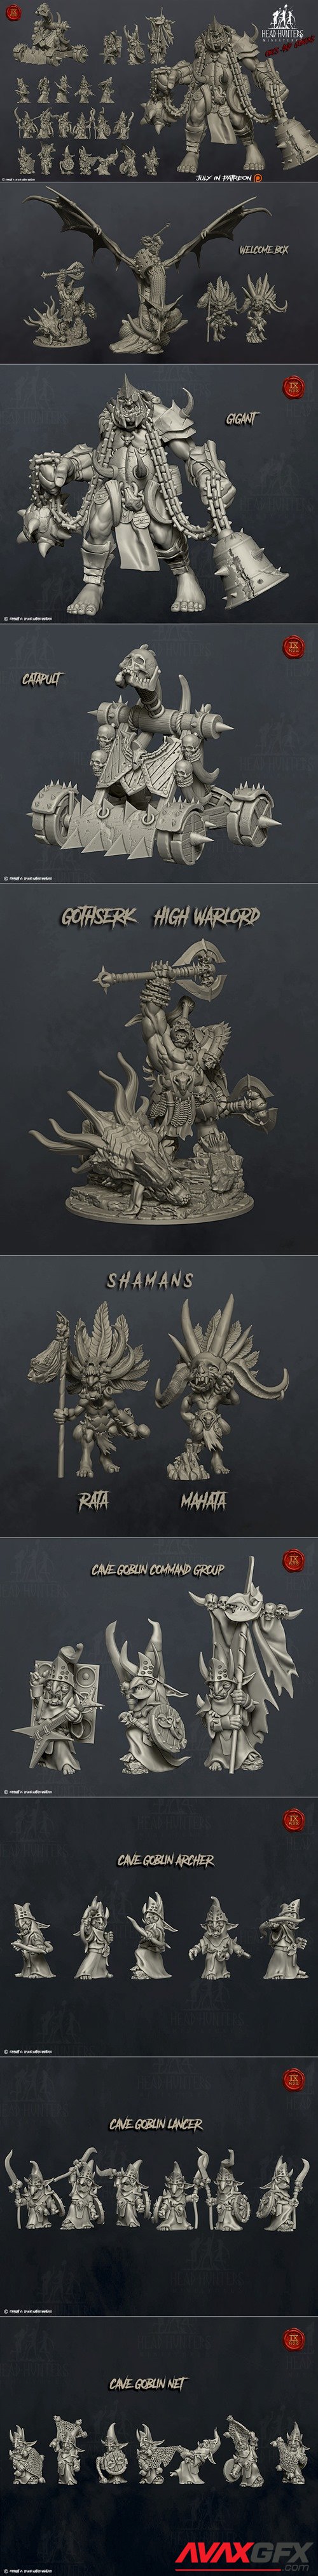 Head Hunters Miniatures and Welcome Pack July 2021 – 3D Printable STL